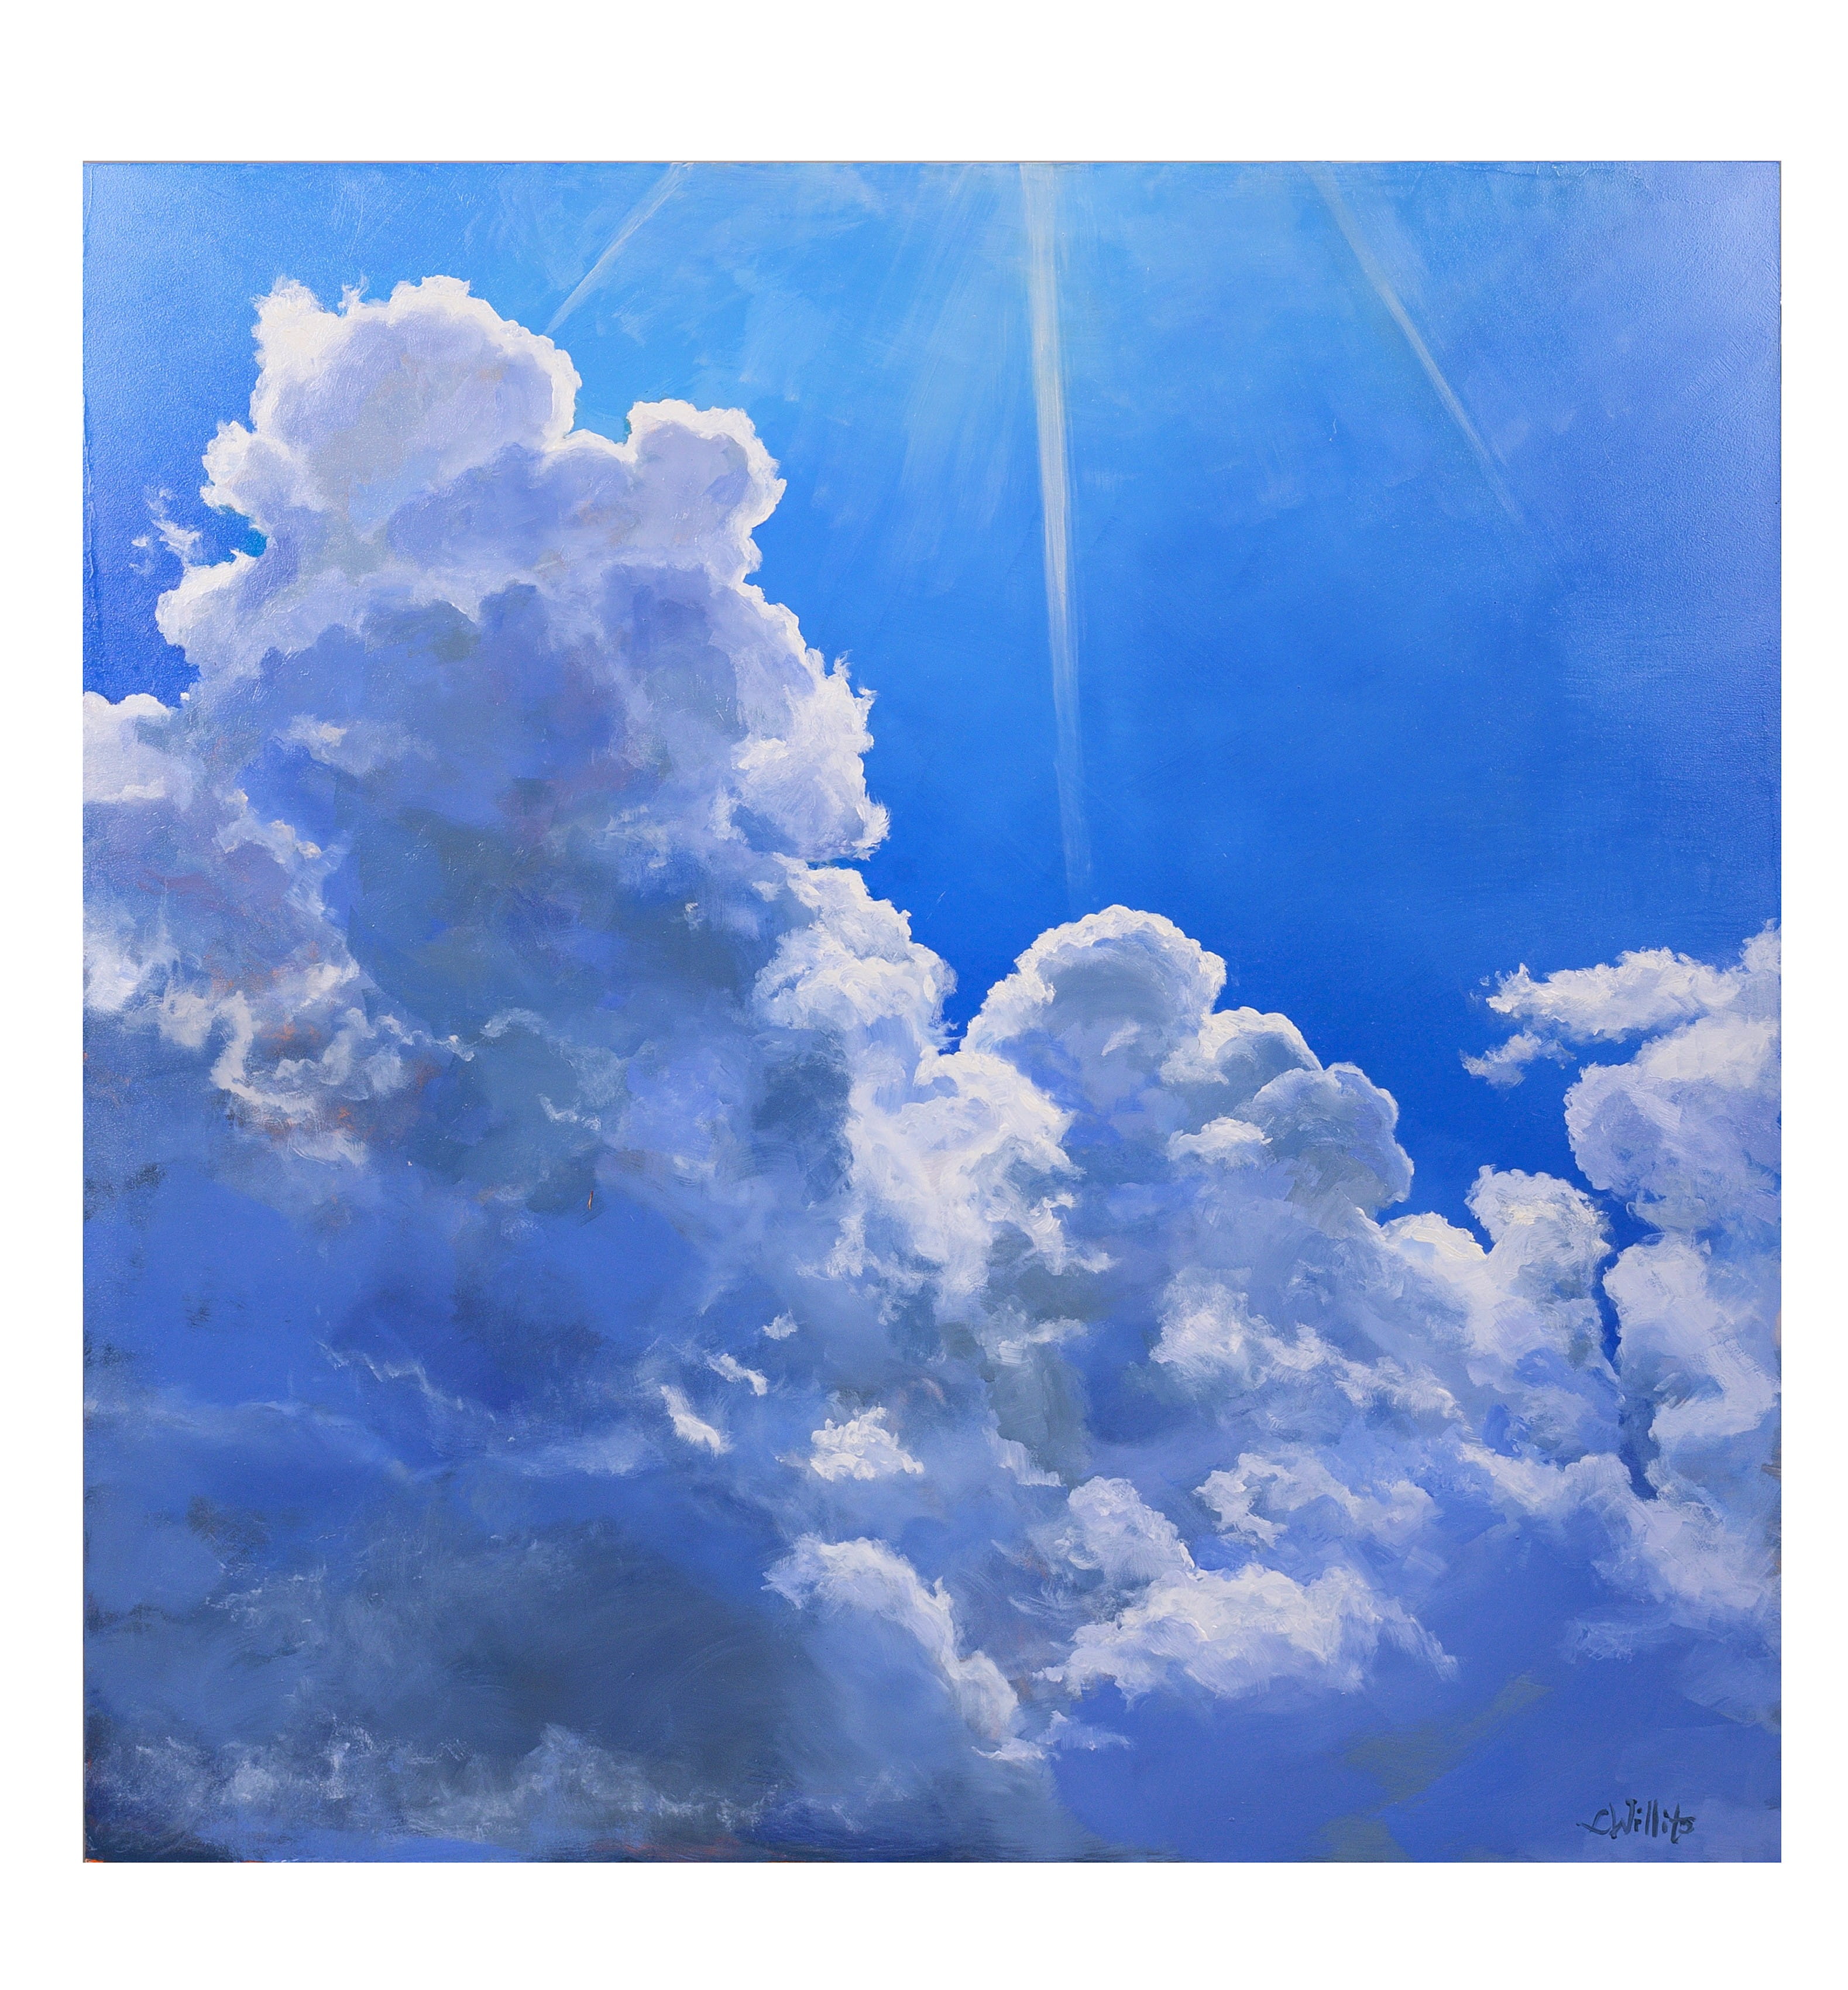 A painting of clouds called "Above and Beyond" by Lisa Willits.